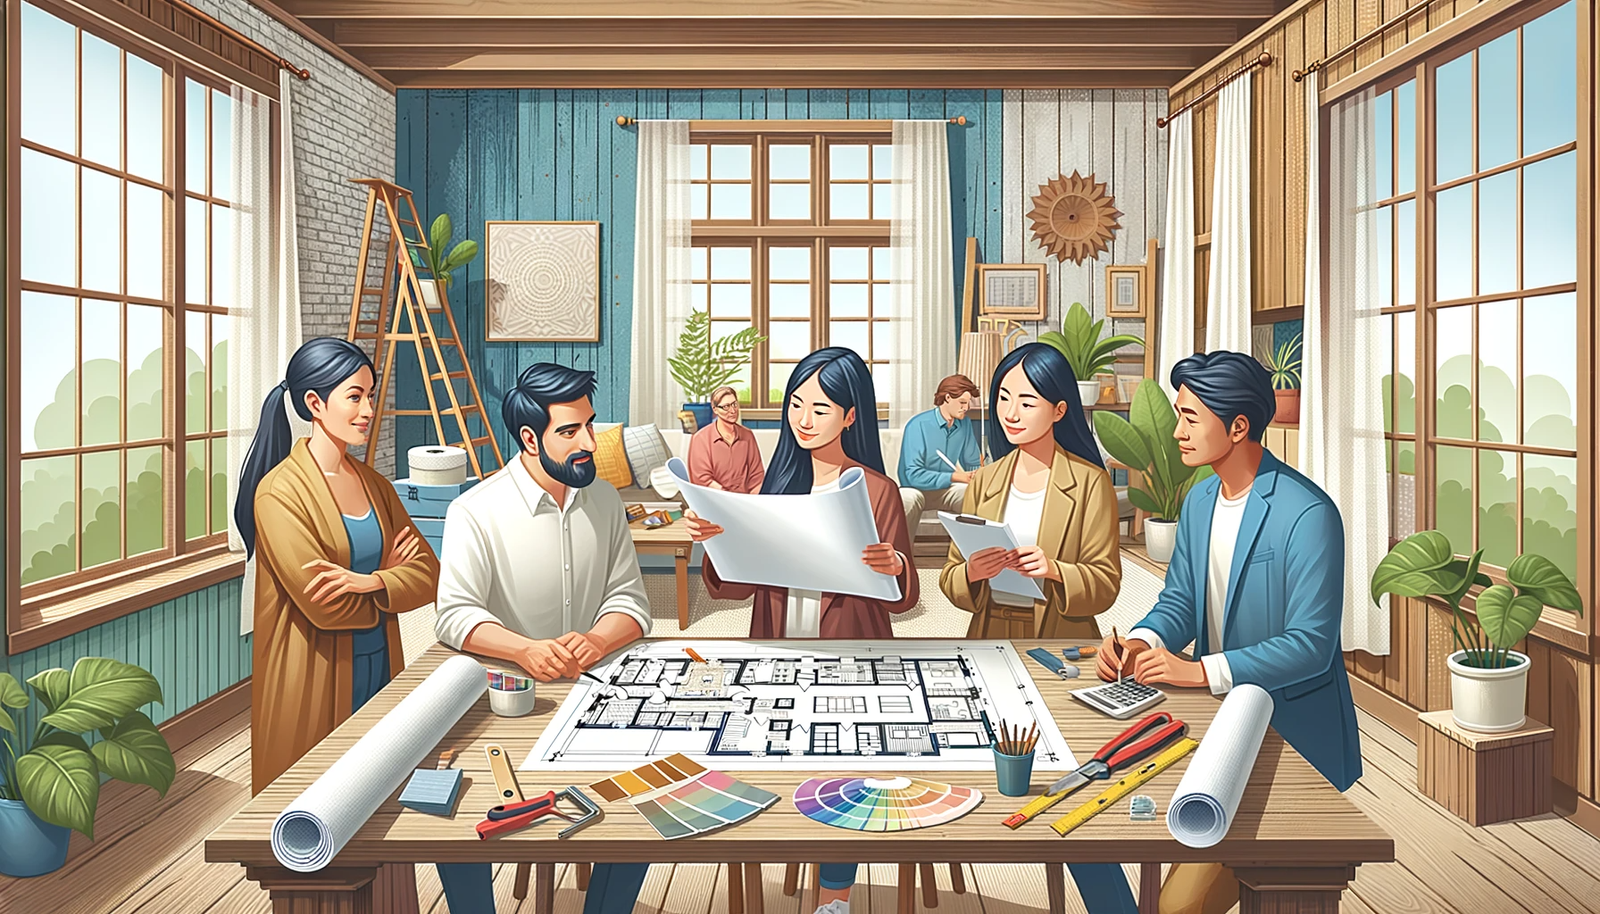 An illustration featuring a diverse group of people engaged in a home renovation discussion. In the center, a South Asian female architect is showing